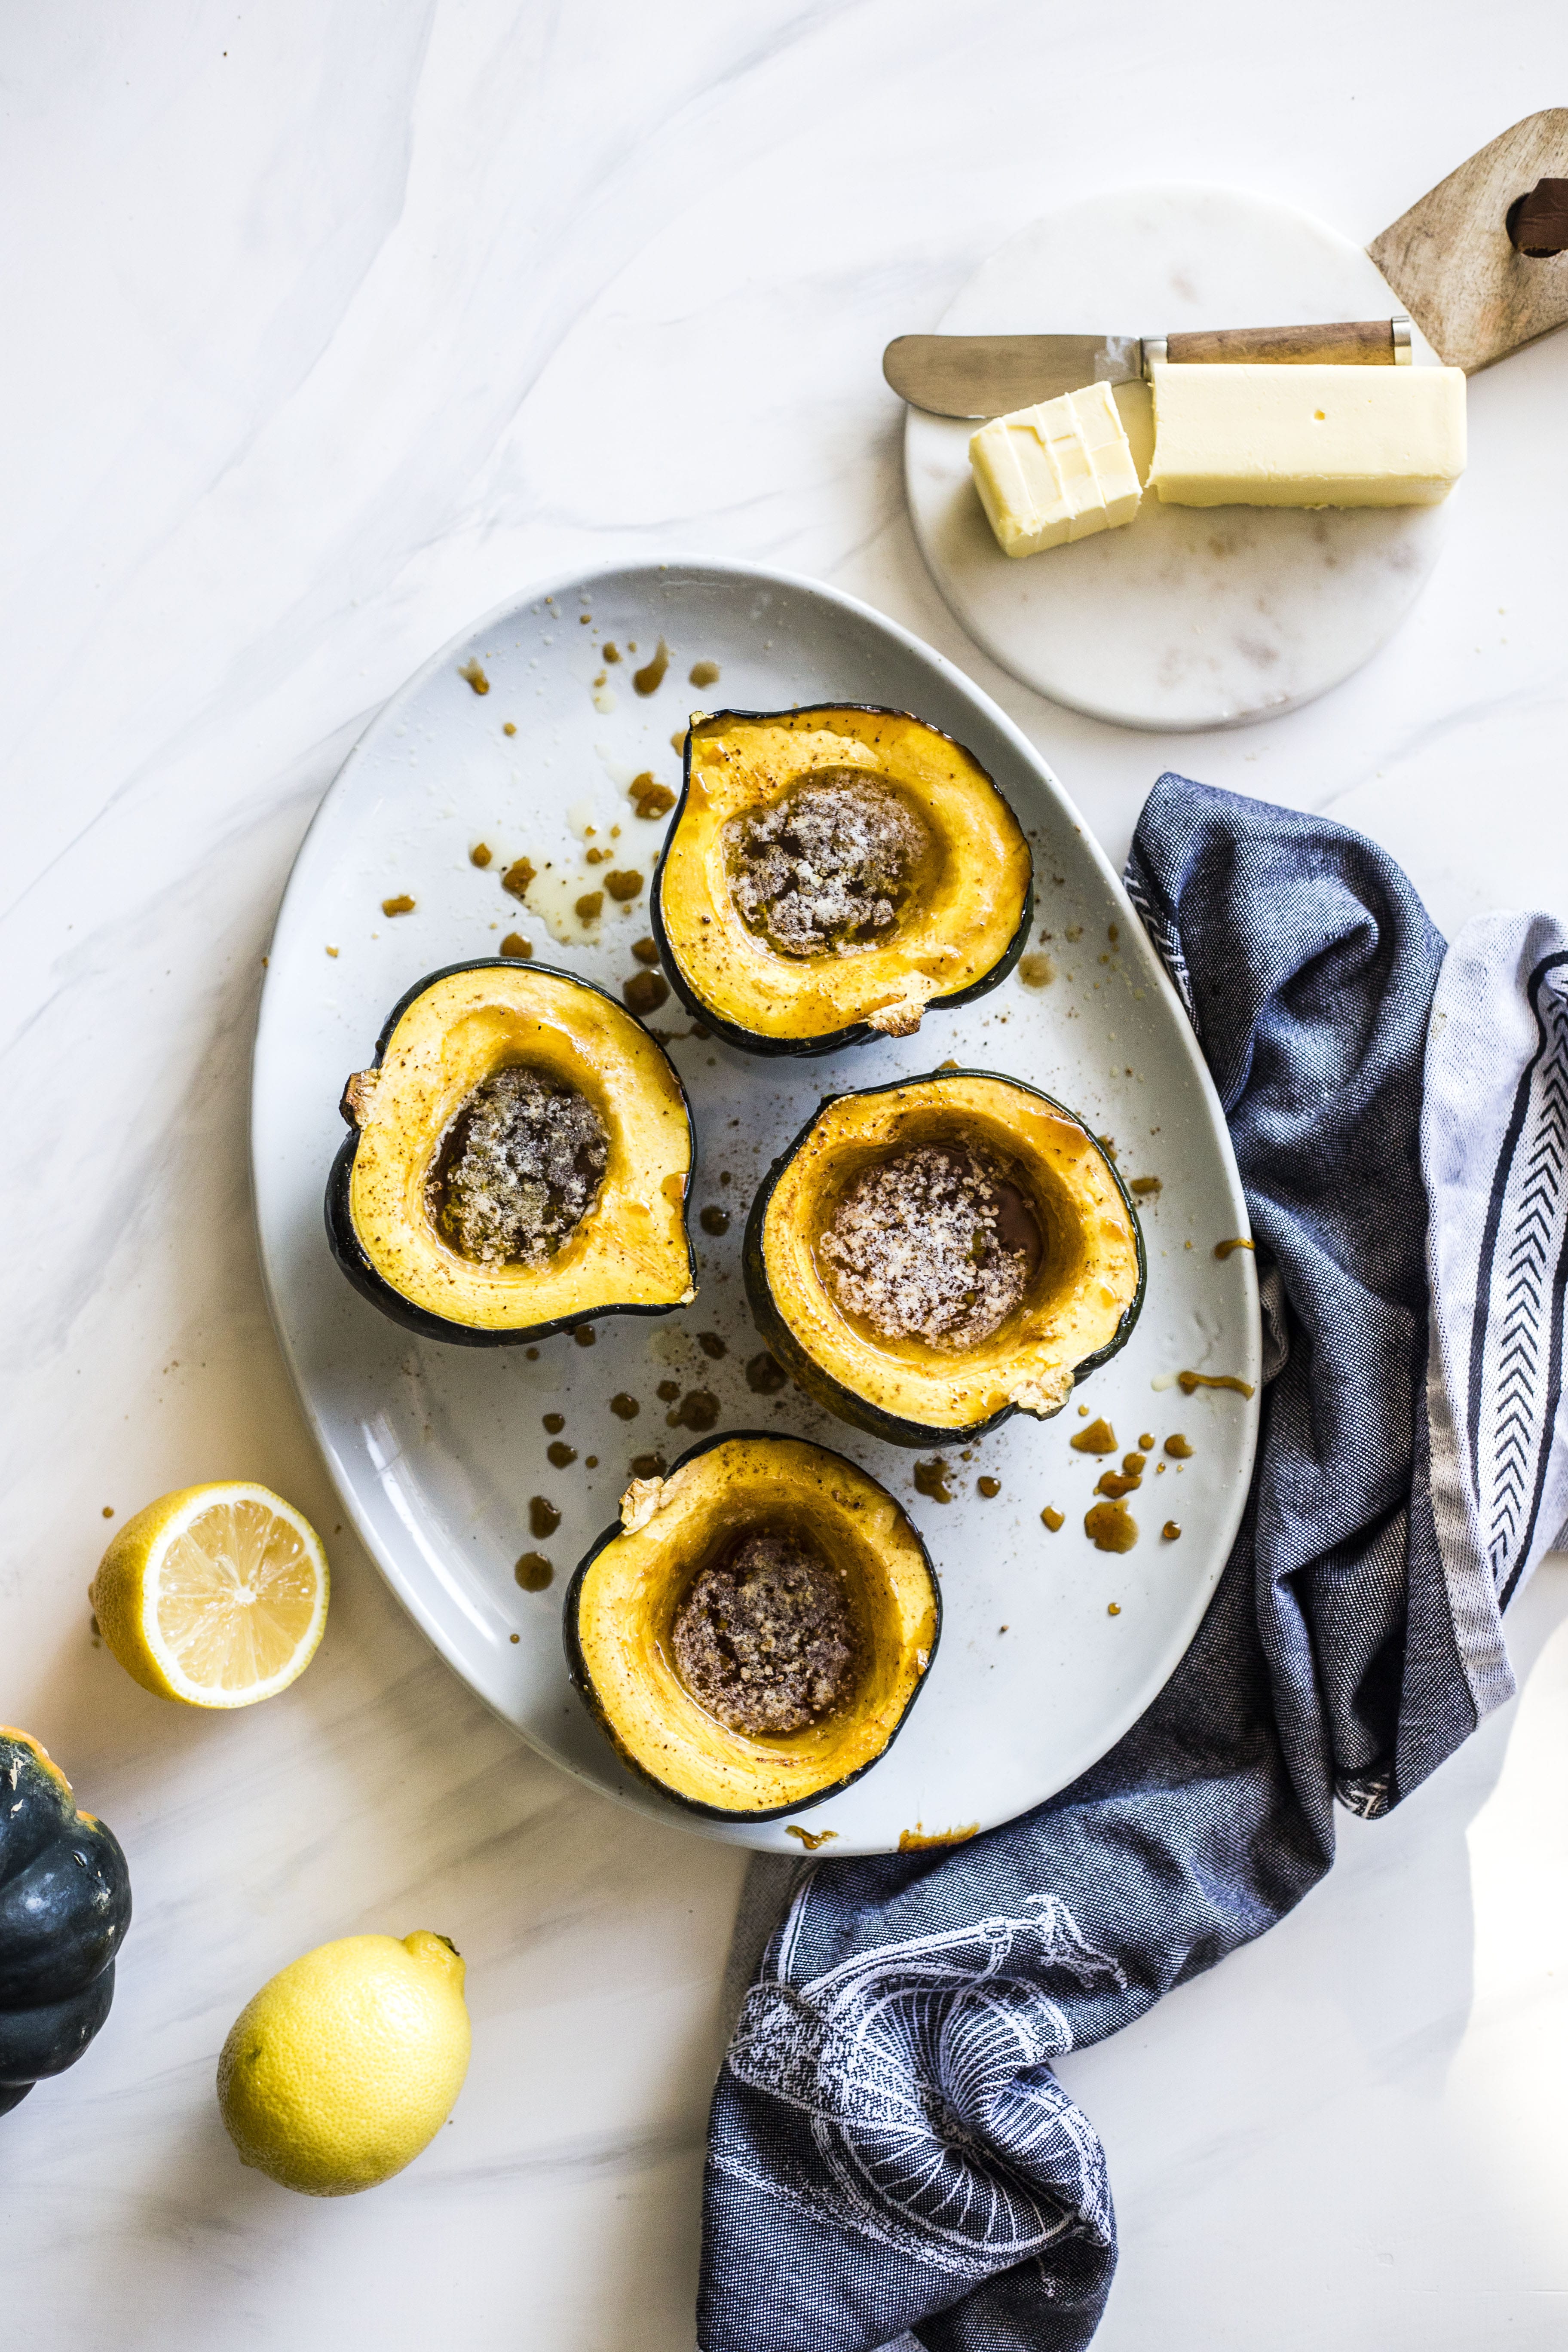 This baked acorn squash recipe is so delicious for the fall! It's made with vanilla and bourbon, finished with balsamic, is super easy, a bit indulgent and perfect for the season. Makes for a fabulous side dish in autumn or even a dessert! I howsweeteats.com #acorn #squash #baked #vanilla #bourbon